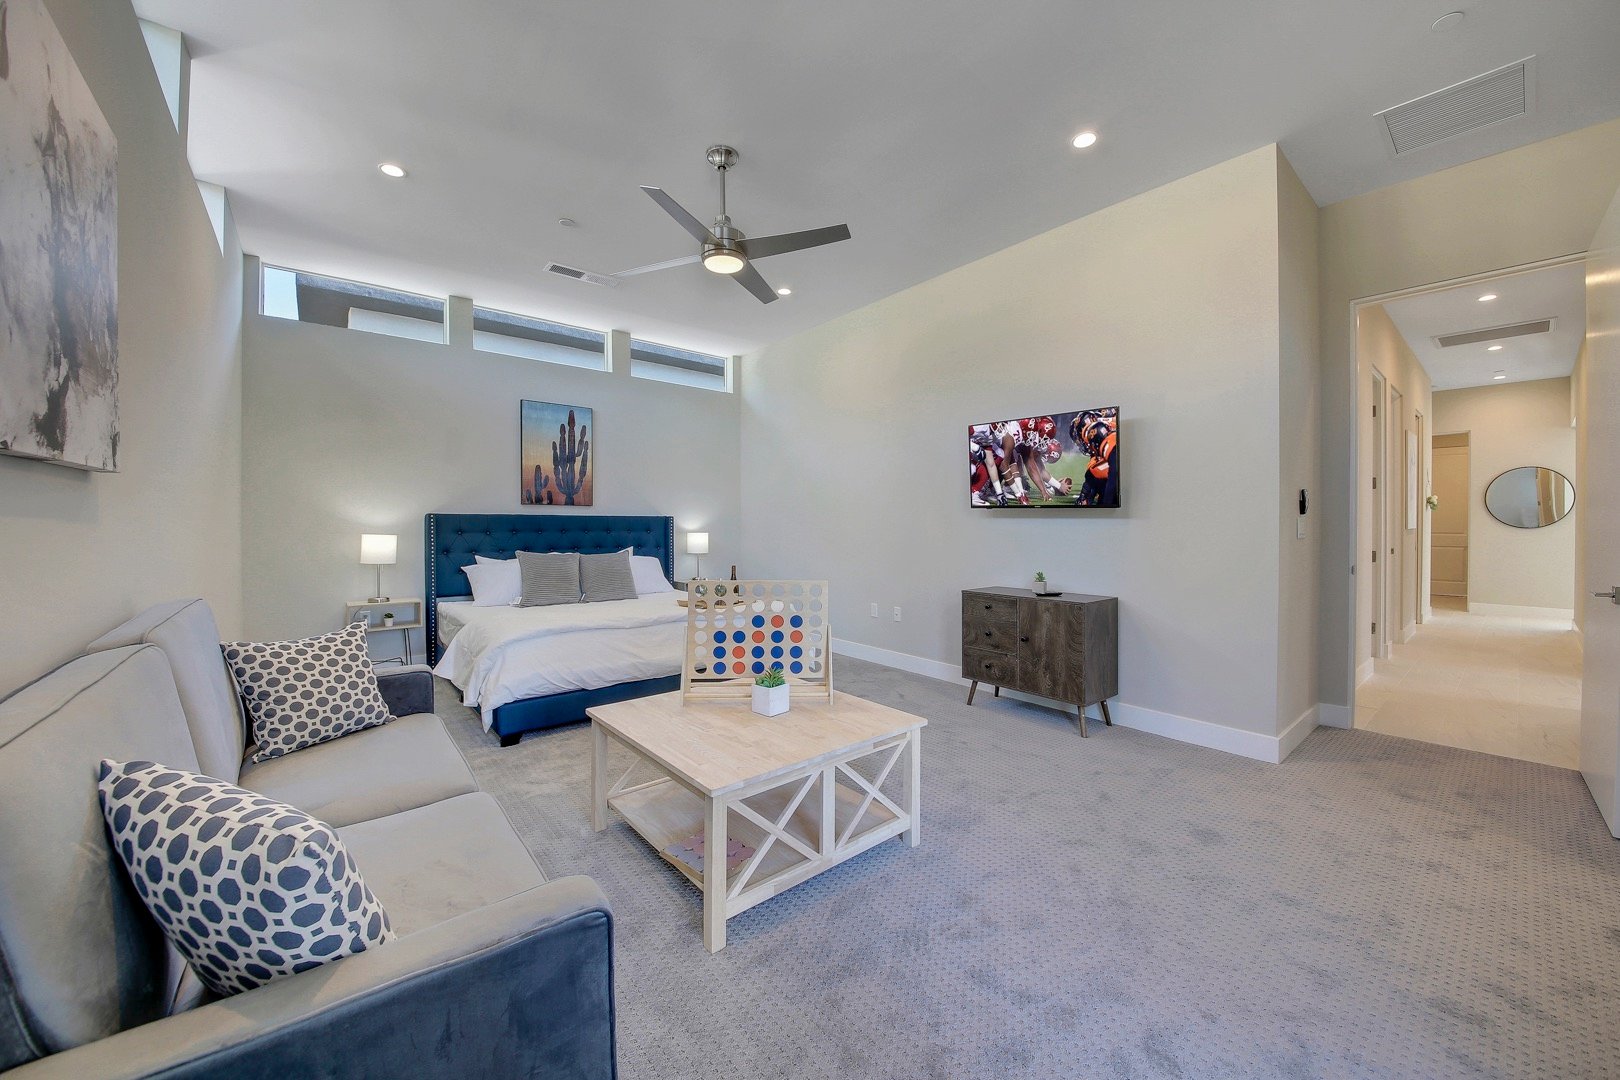 Catch up on your favorite shows, or enjoy a game of Connect 4! The Master Suite is located at the end of the hallway and has direct access to the back patio.